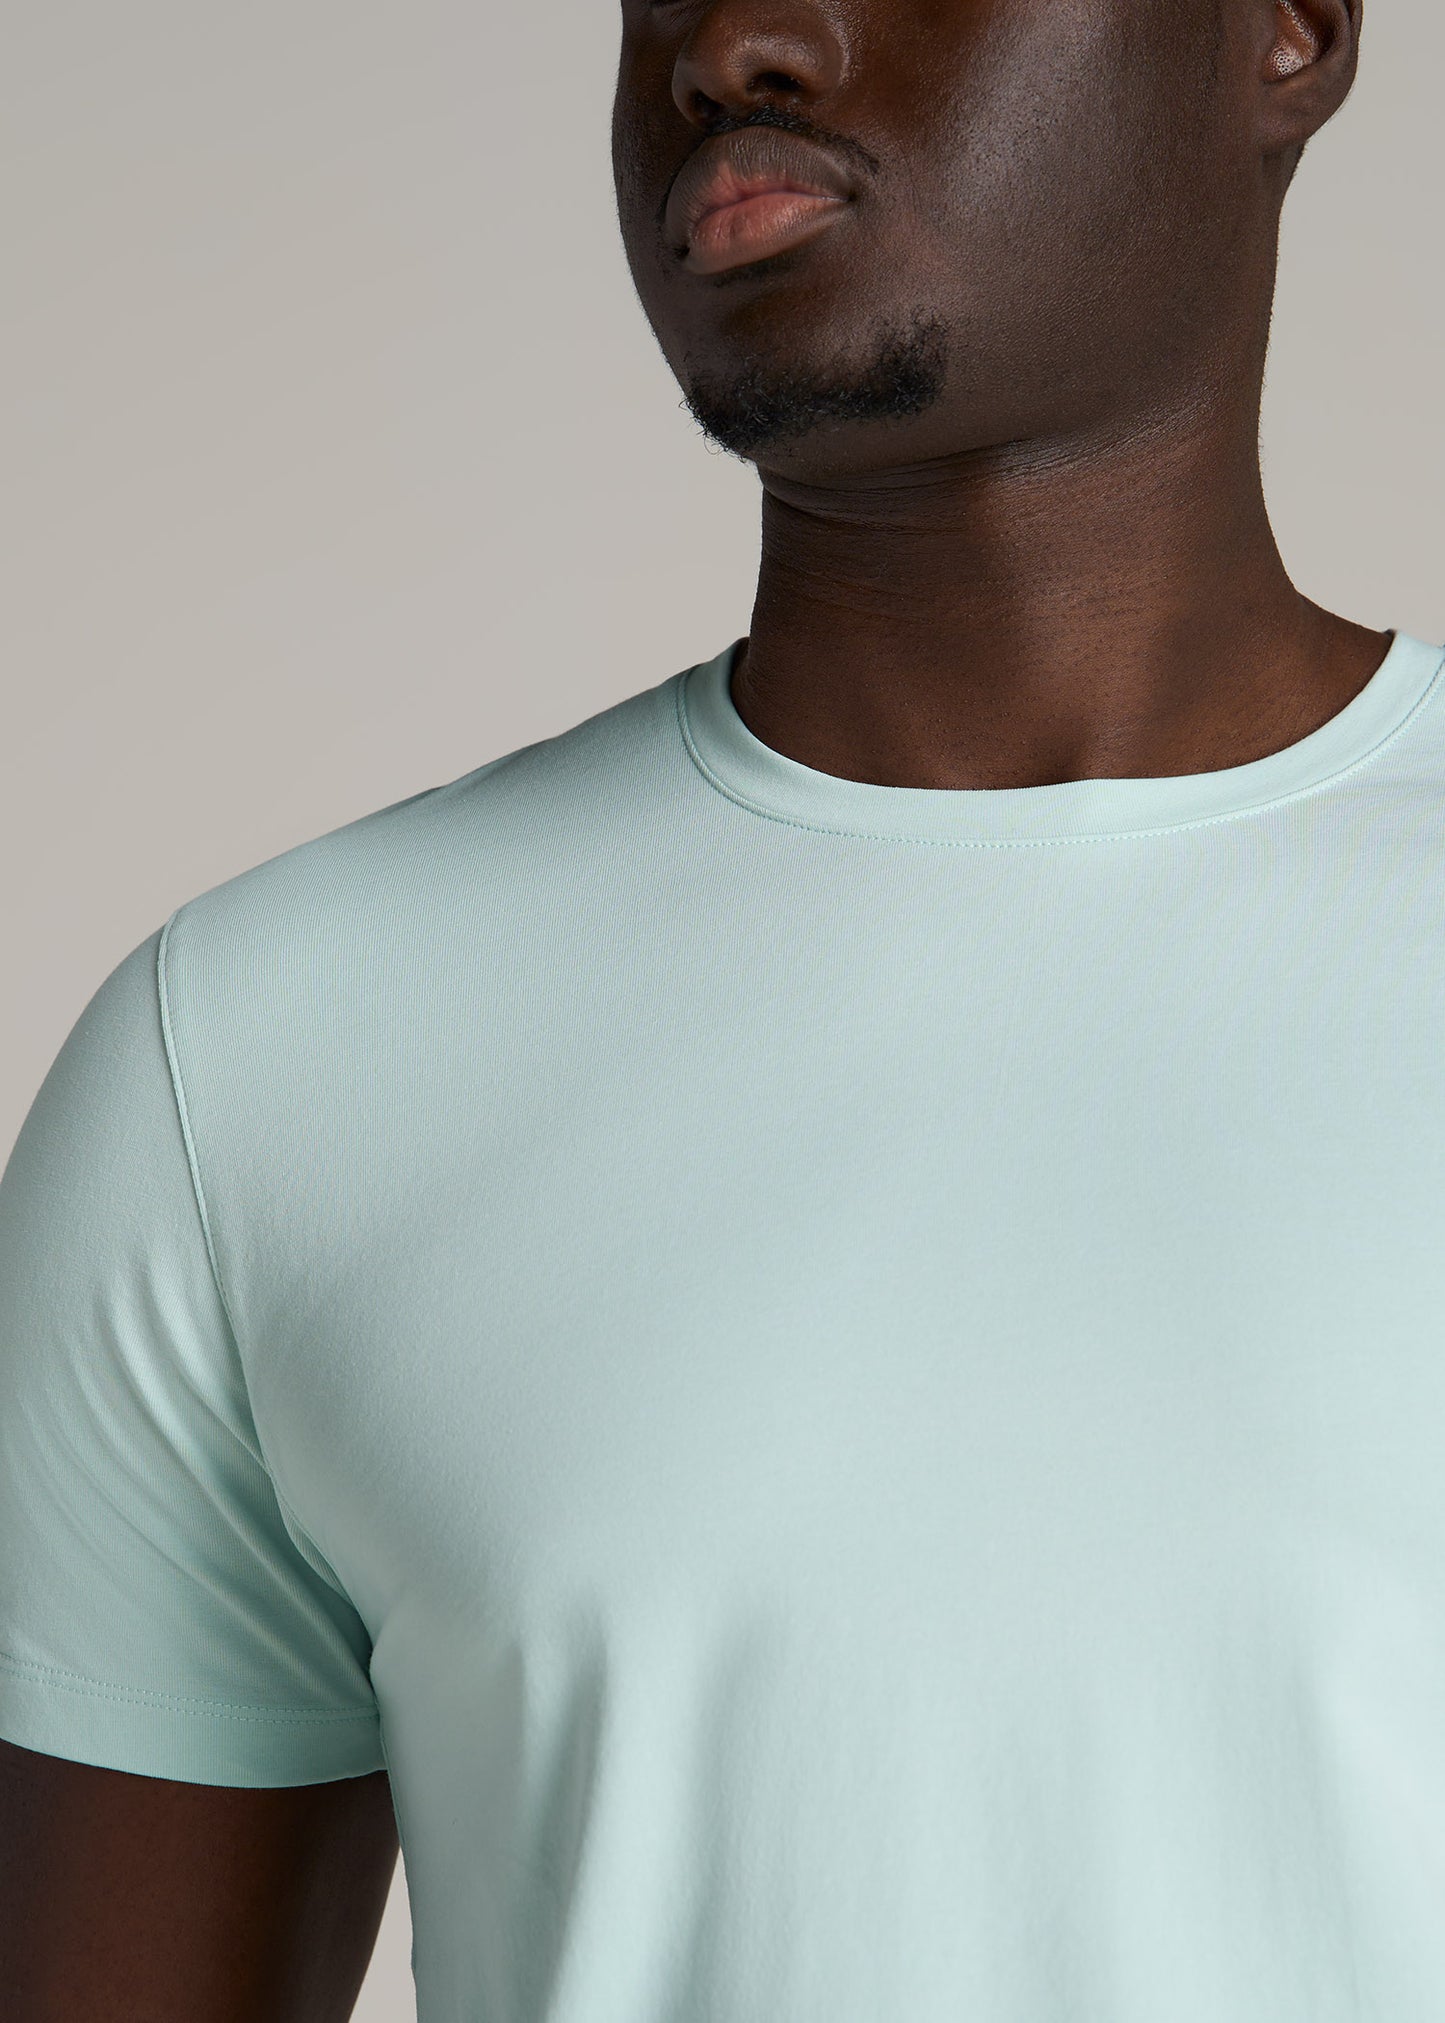 Stretch Cotton MODERN-FIT T-Shirt for Tall Men in Mint